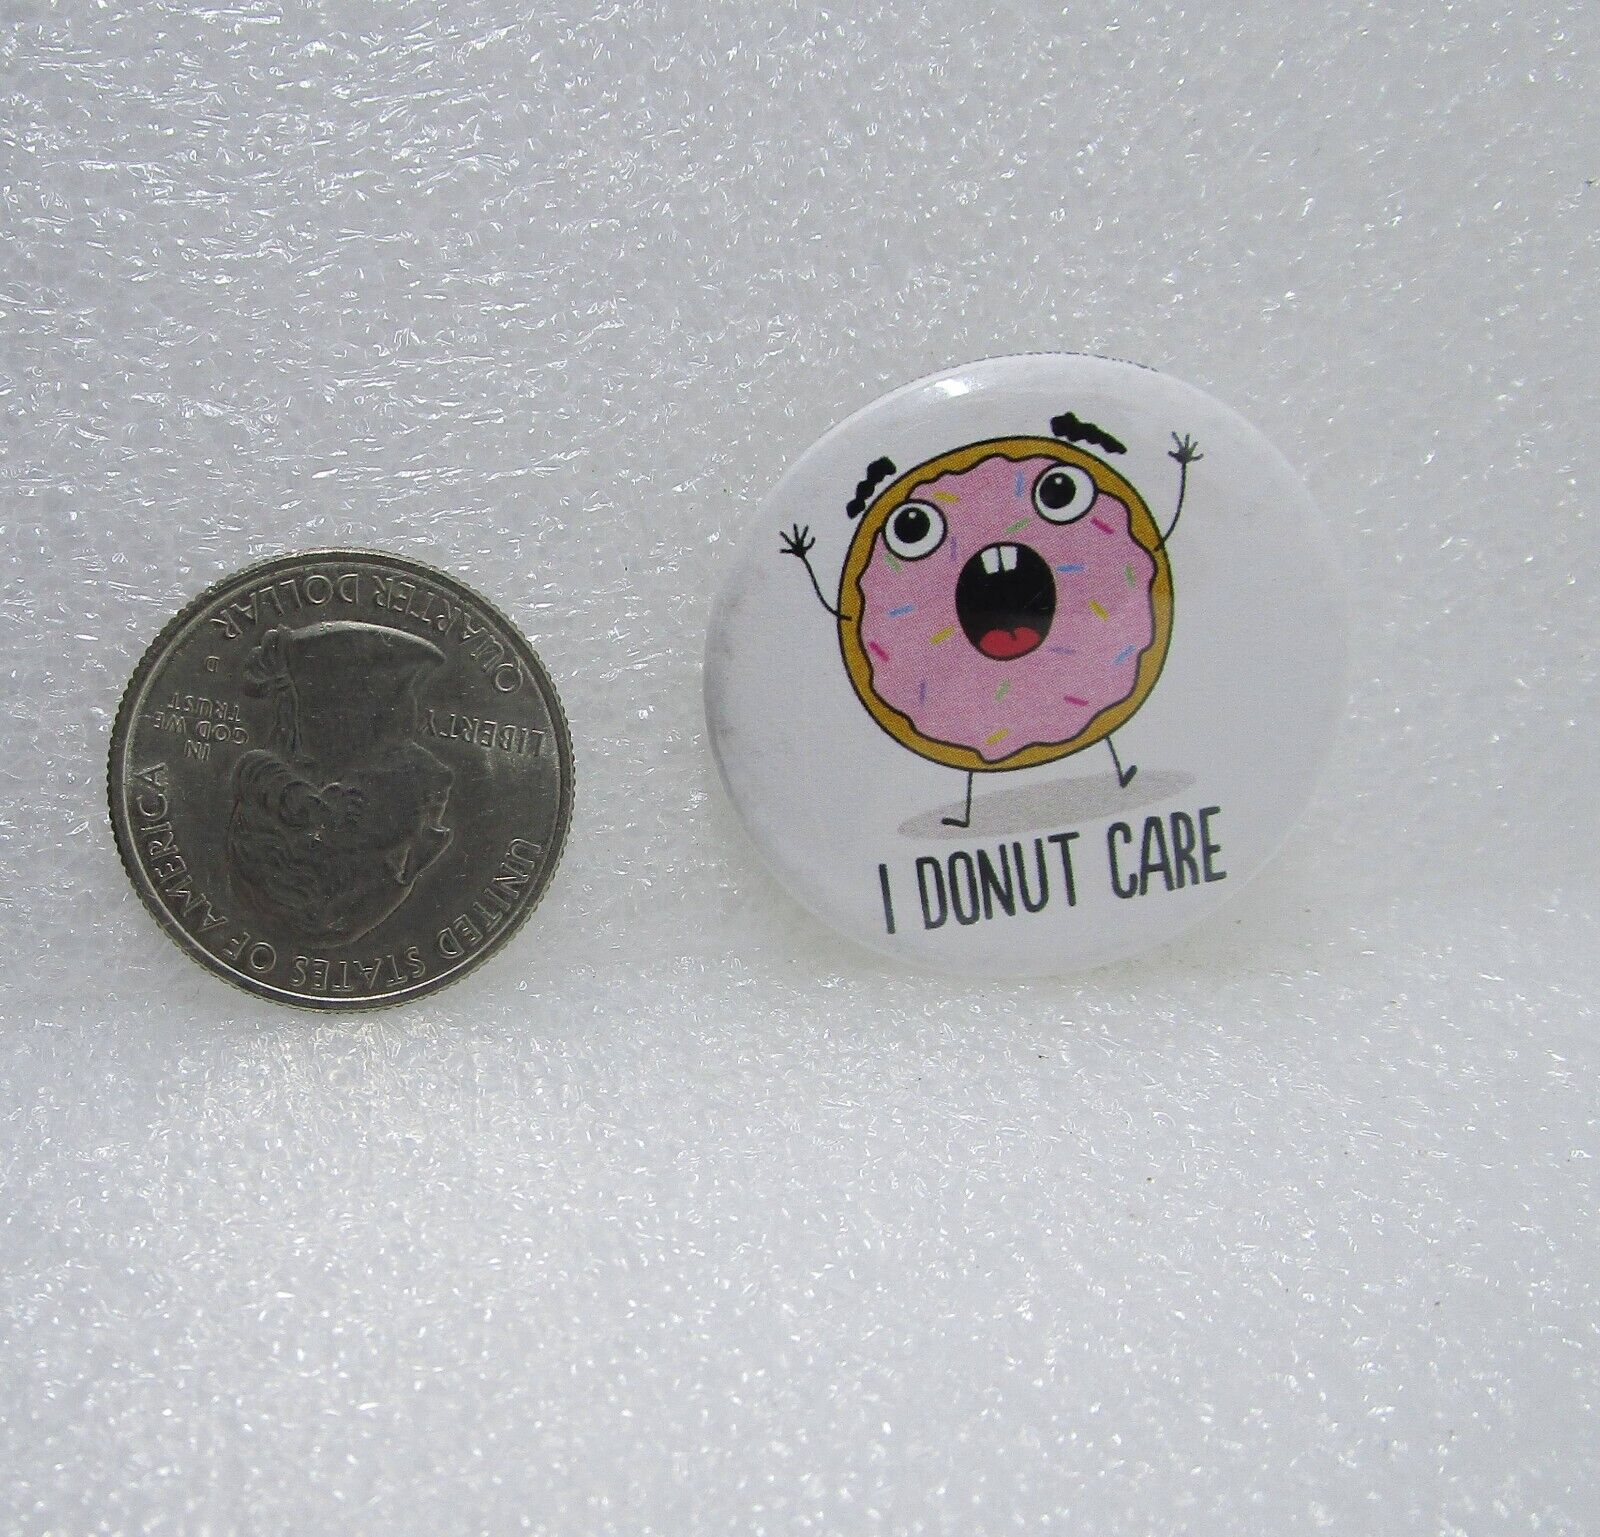 I Donut Care Button Pin